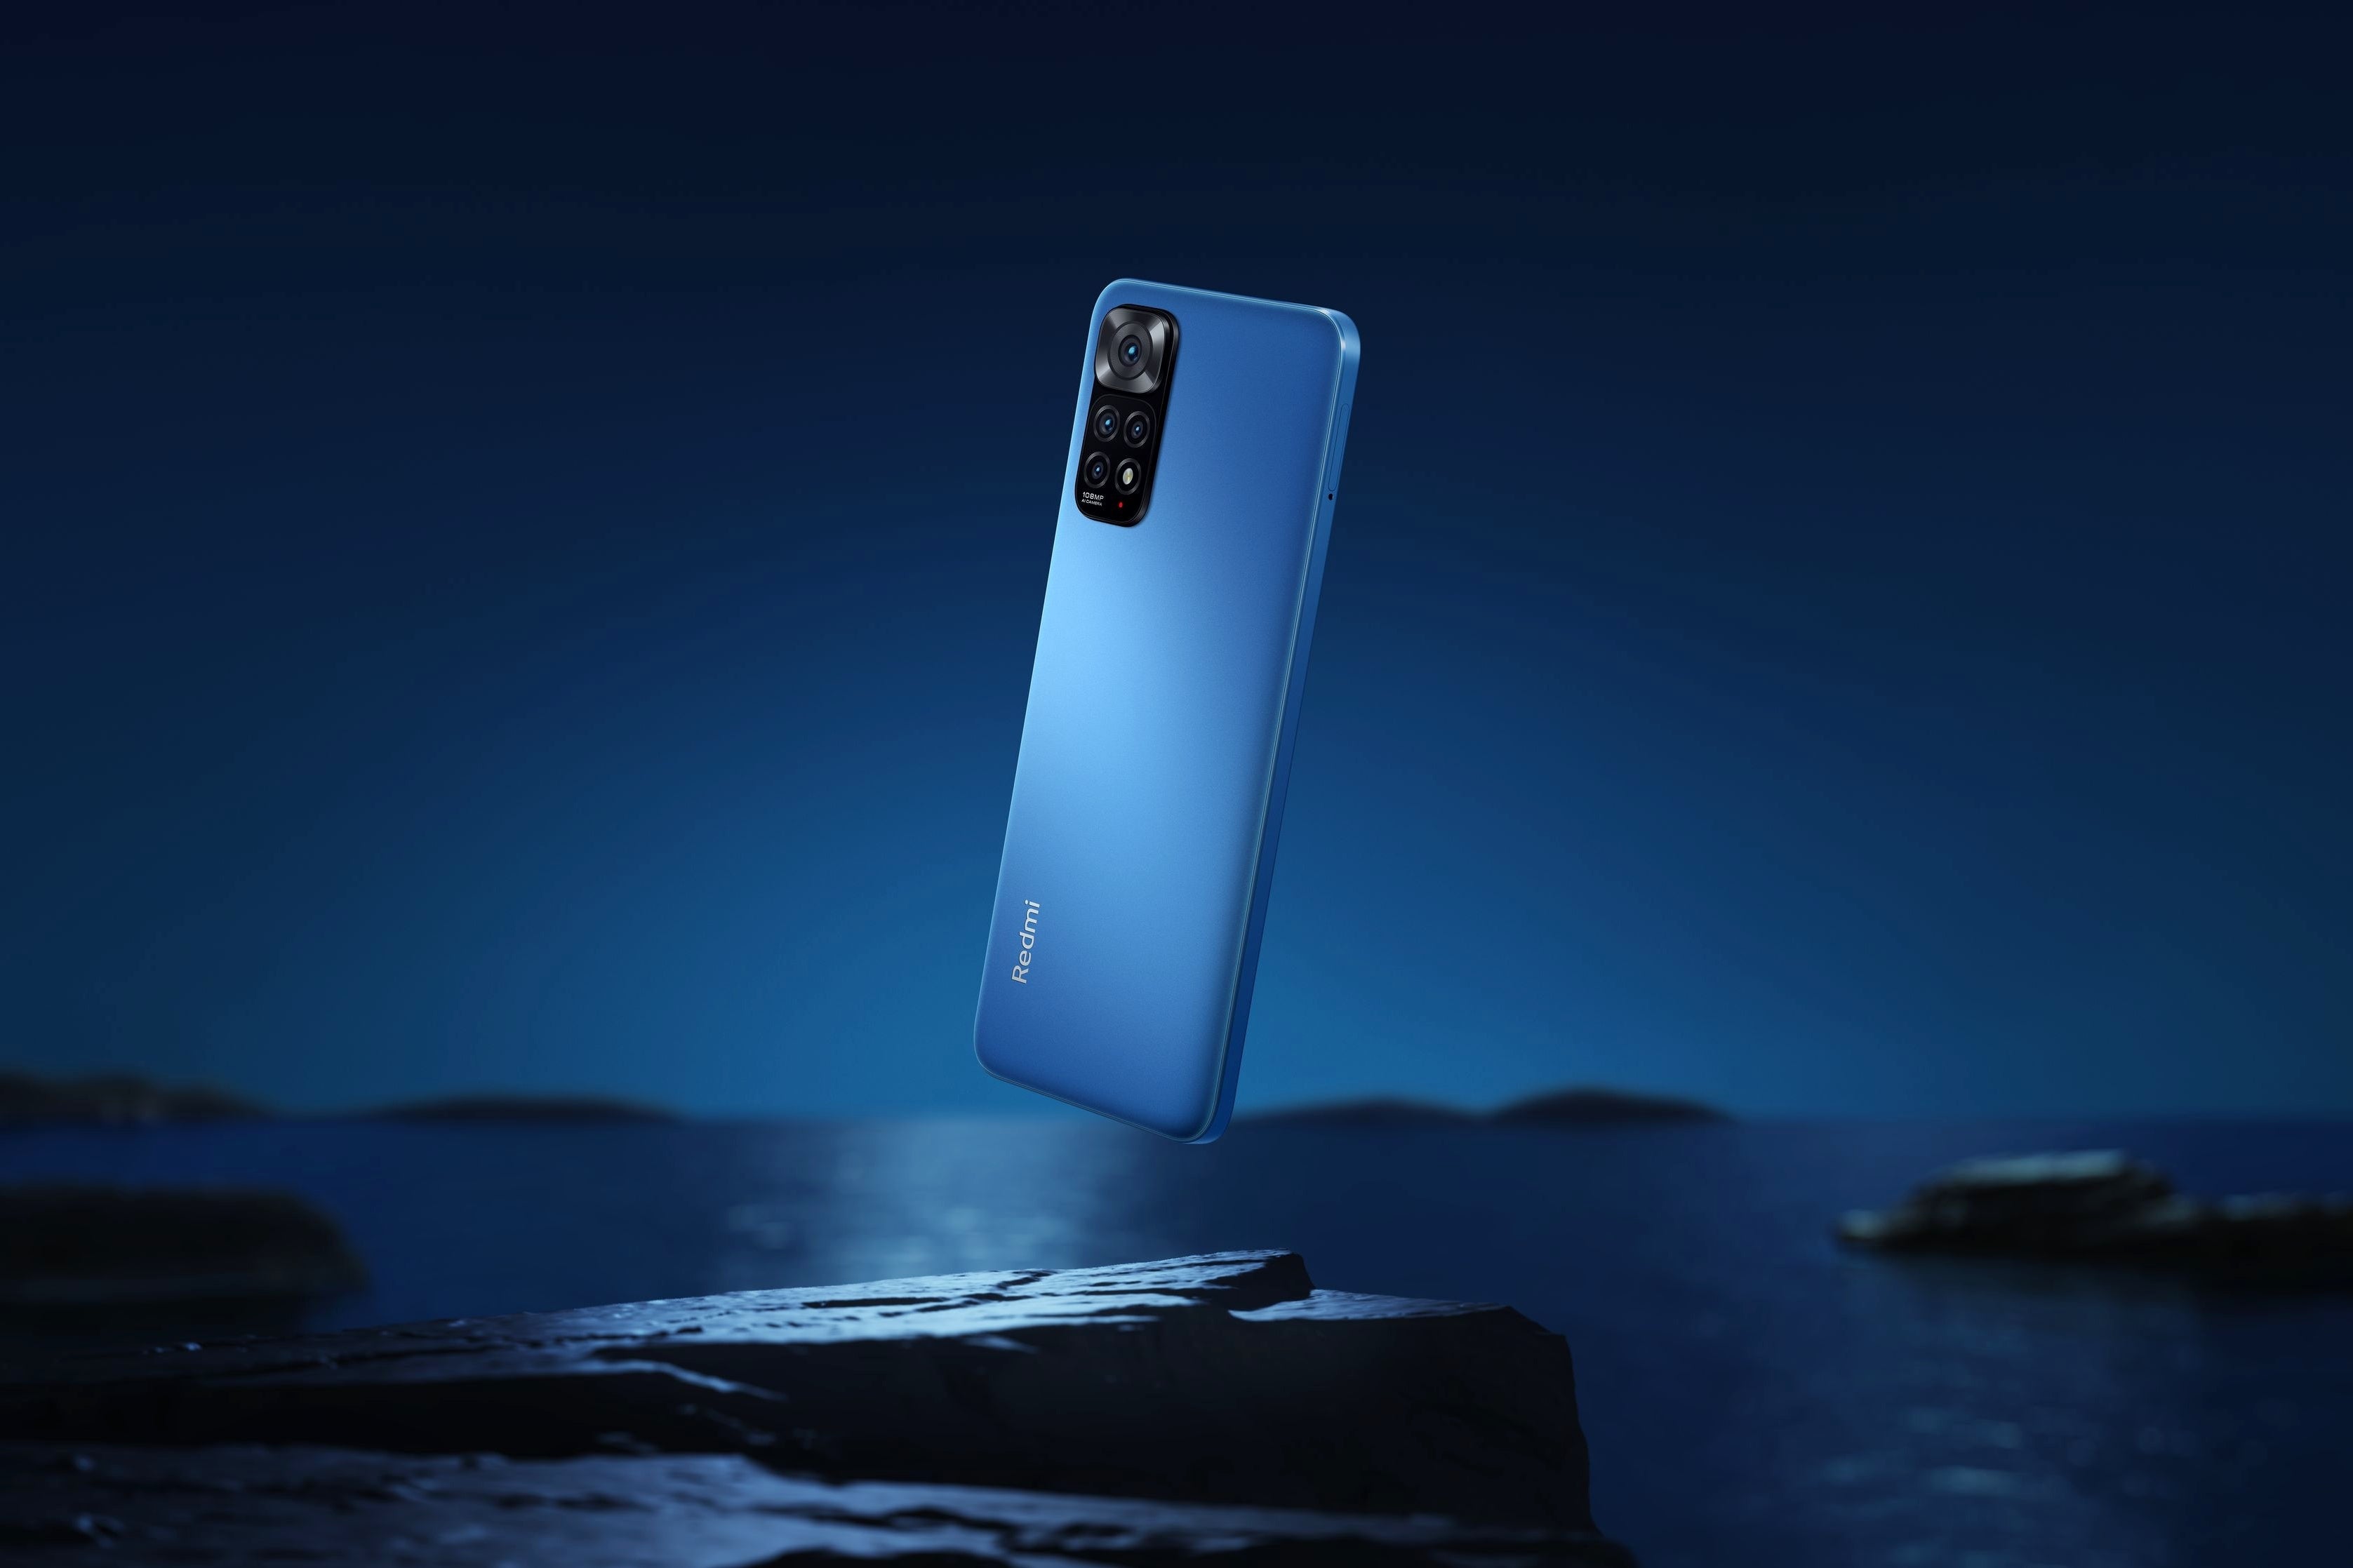 The Redmi Note 11S in Twilight Blue. - Global Xiaomi Note 11 and Note 11S phones are here offering major bang for your buck